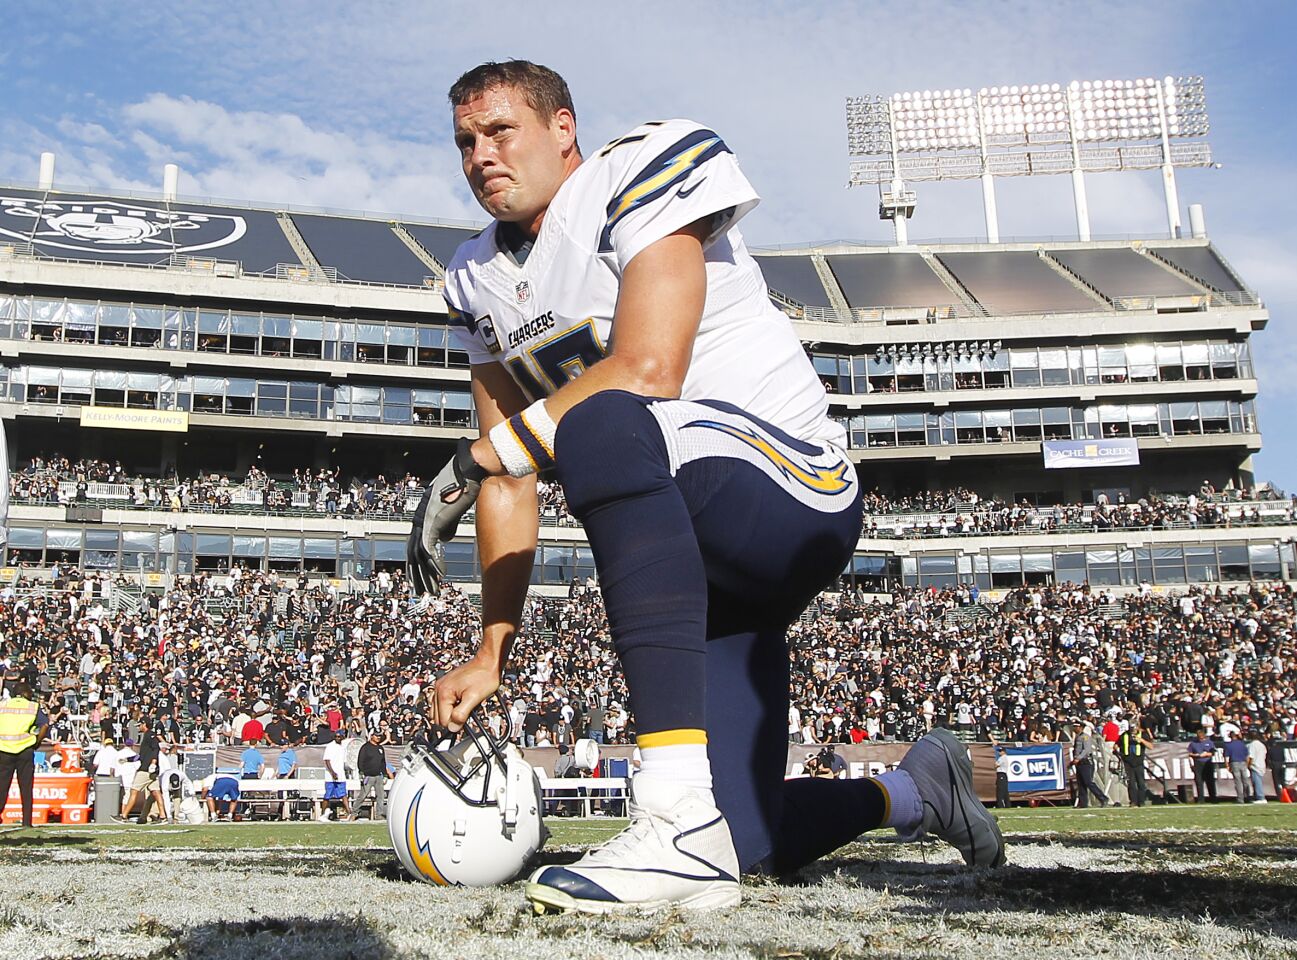 San Diego Chargers Philip Rivers takes a knee on the field after a 34-31 loss to the Raiders in Oakland on Oct. 9, 2016.